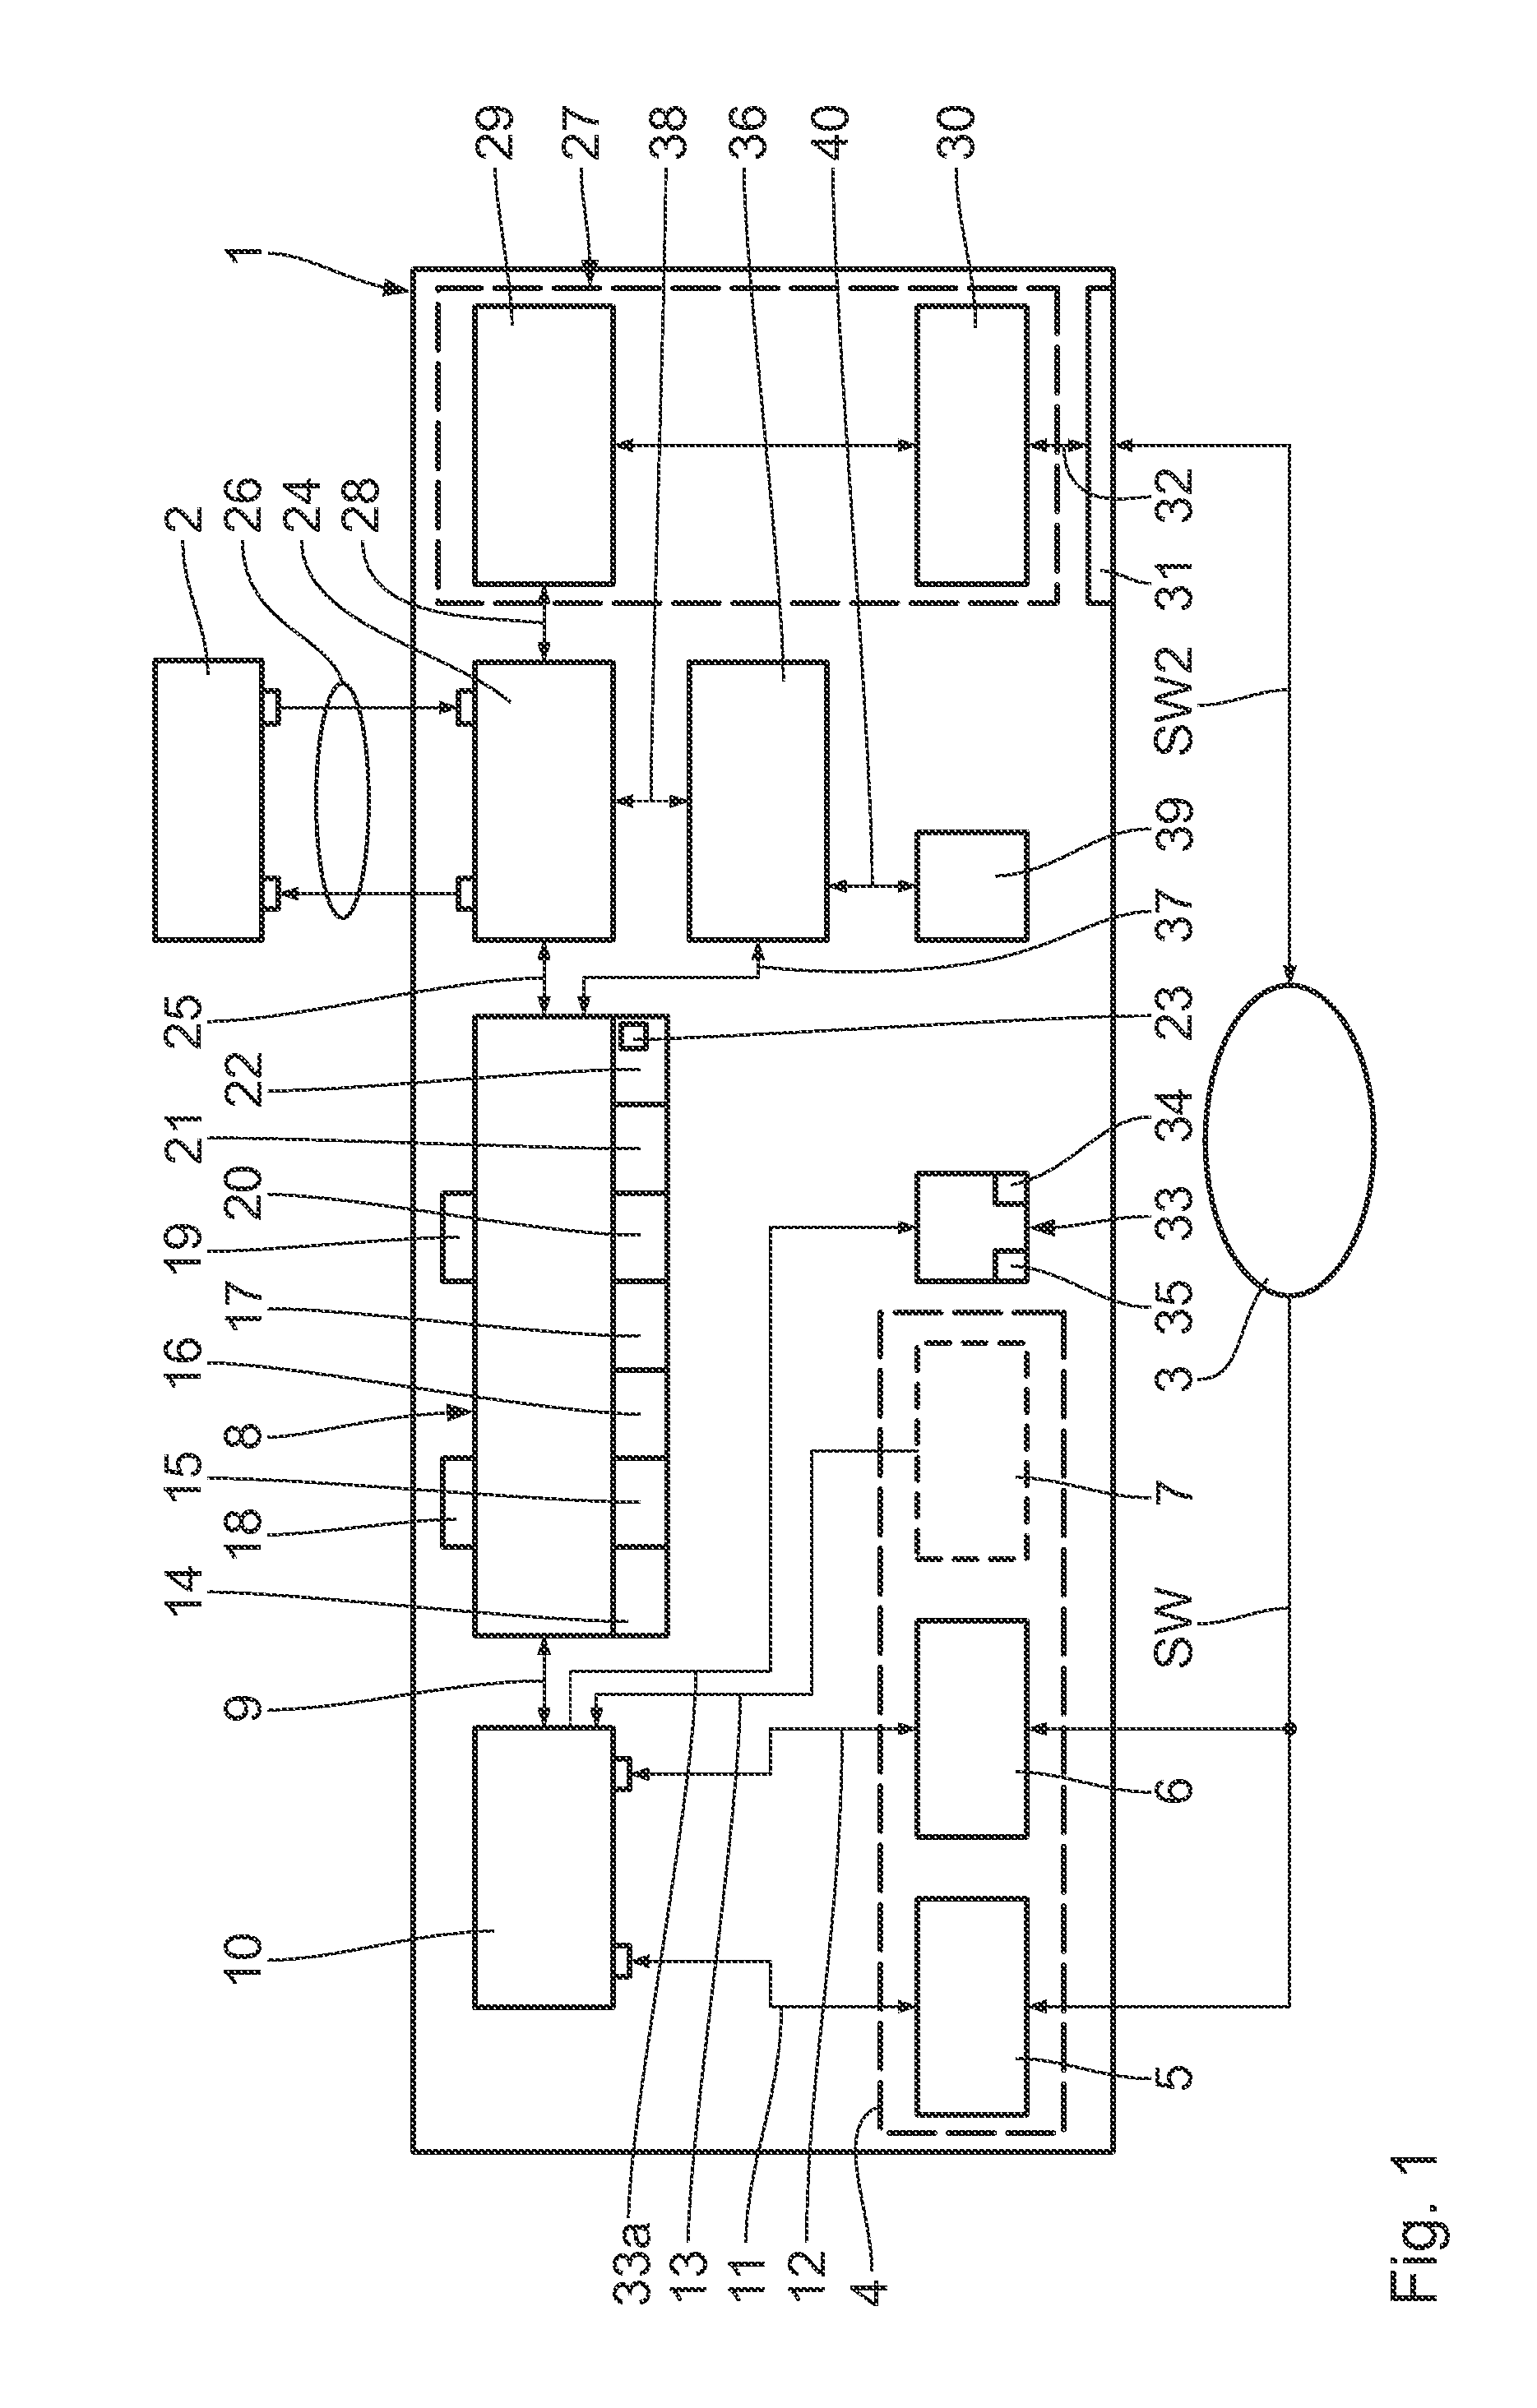 Remote control device for controlling a mechanism with the aid of a movable object and interface module for communication between modules of a remote control device of this type or between one of the modules and an external mechanism